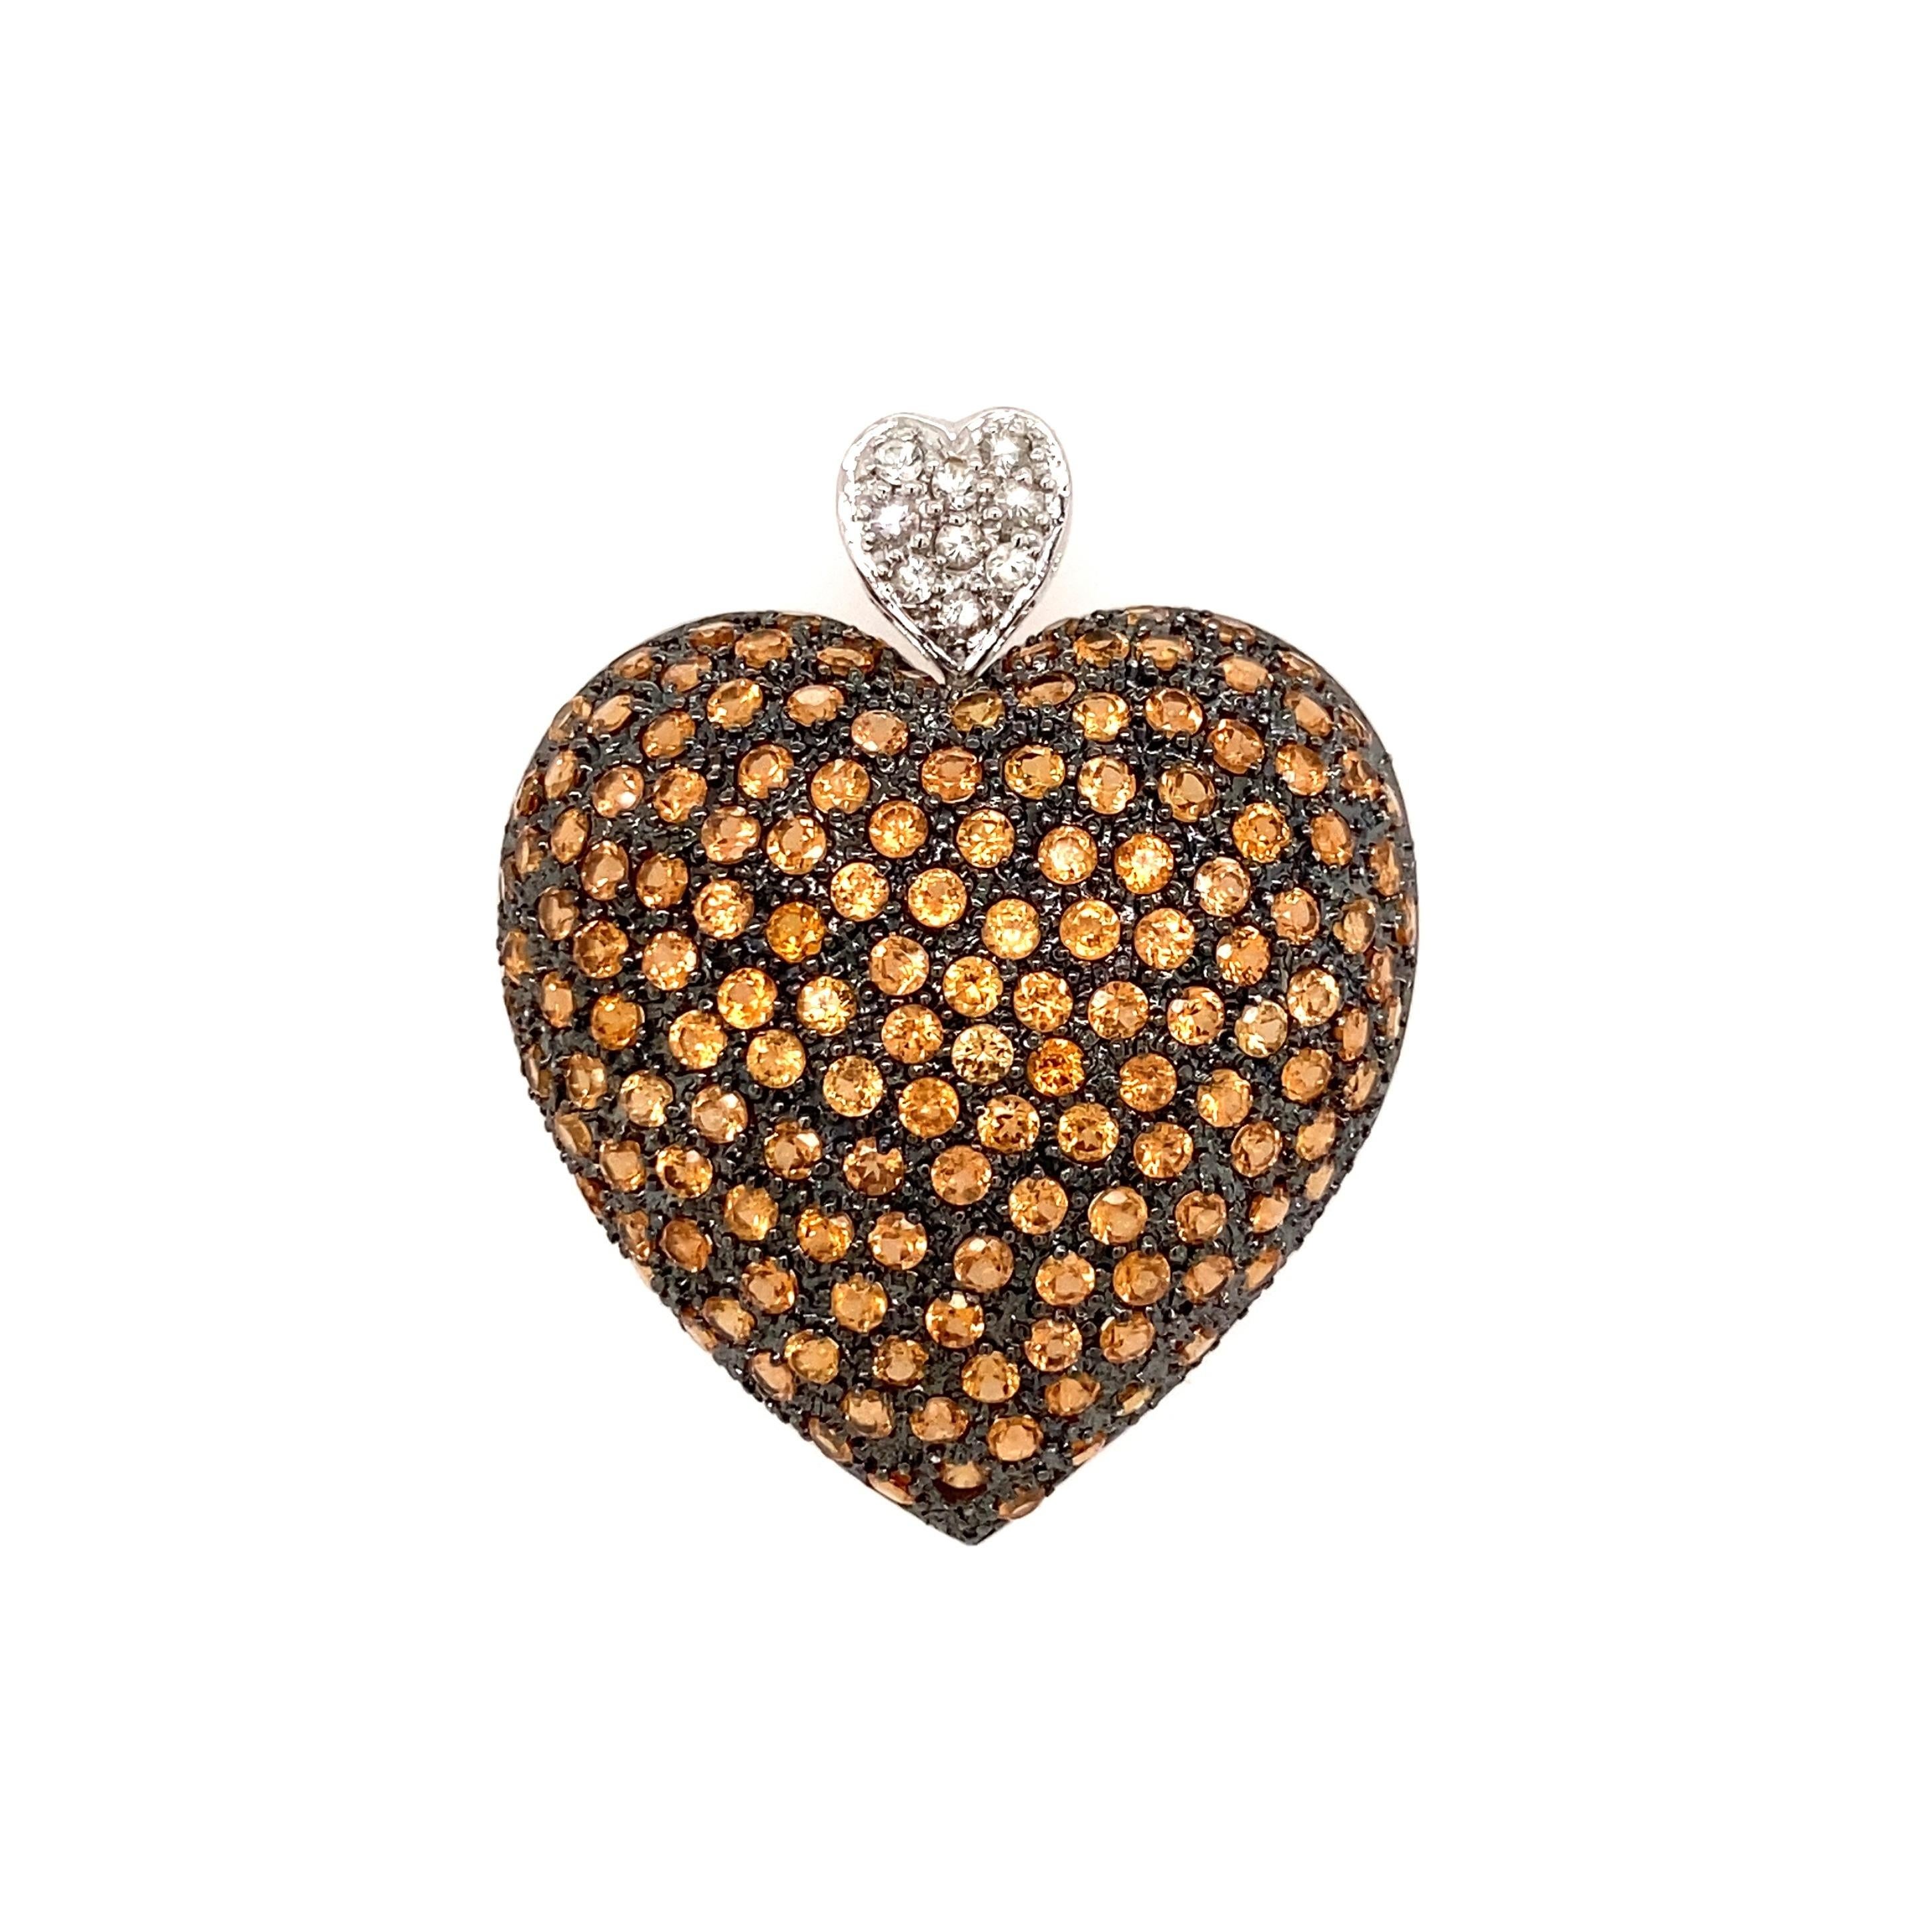 Simply Beautiful! Tangerine Garnet Pave Heart Gold Pendant. Hand set with round Tangerine Garnets, approx. 5.55tcw and accented with White Sapphires, approx. 0.21tcw. Hand crafted 14K White Gold and Black Rhodium mounting. Measuring approx. 1.65” l